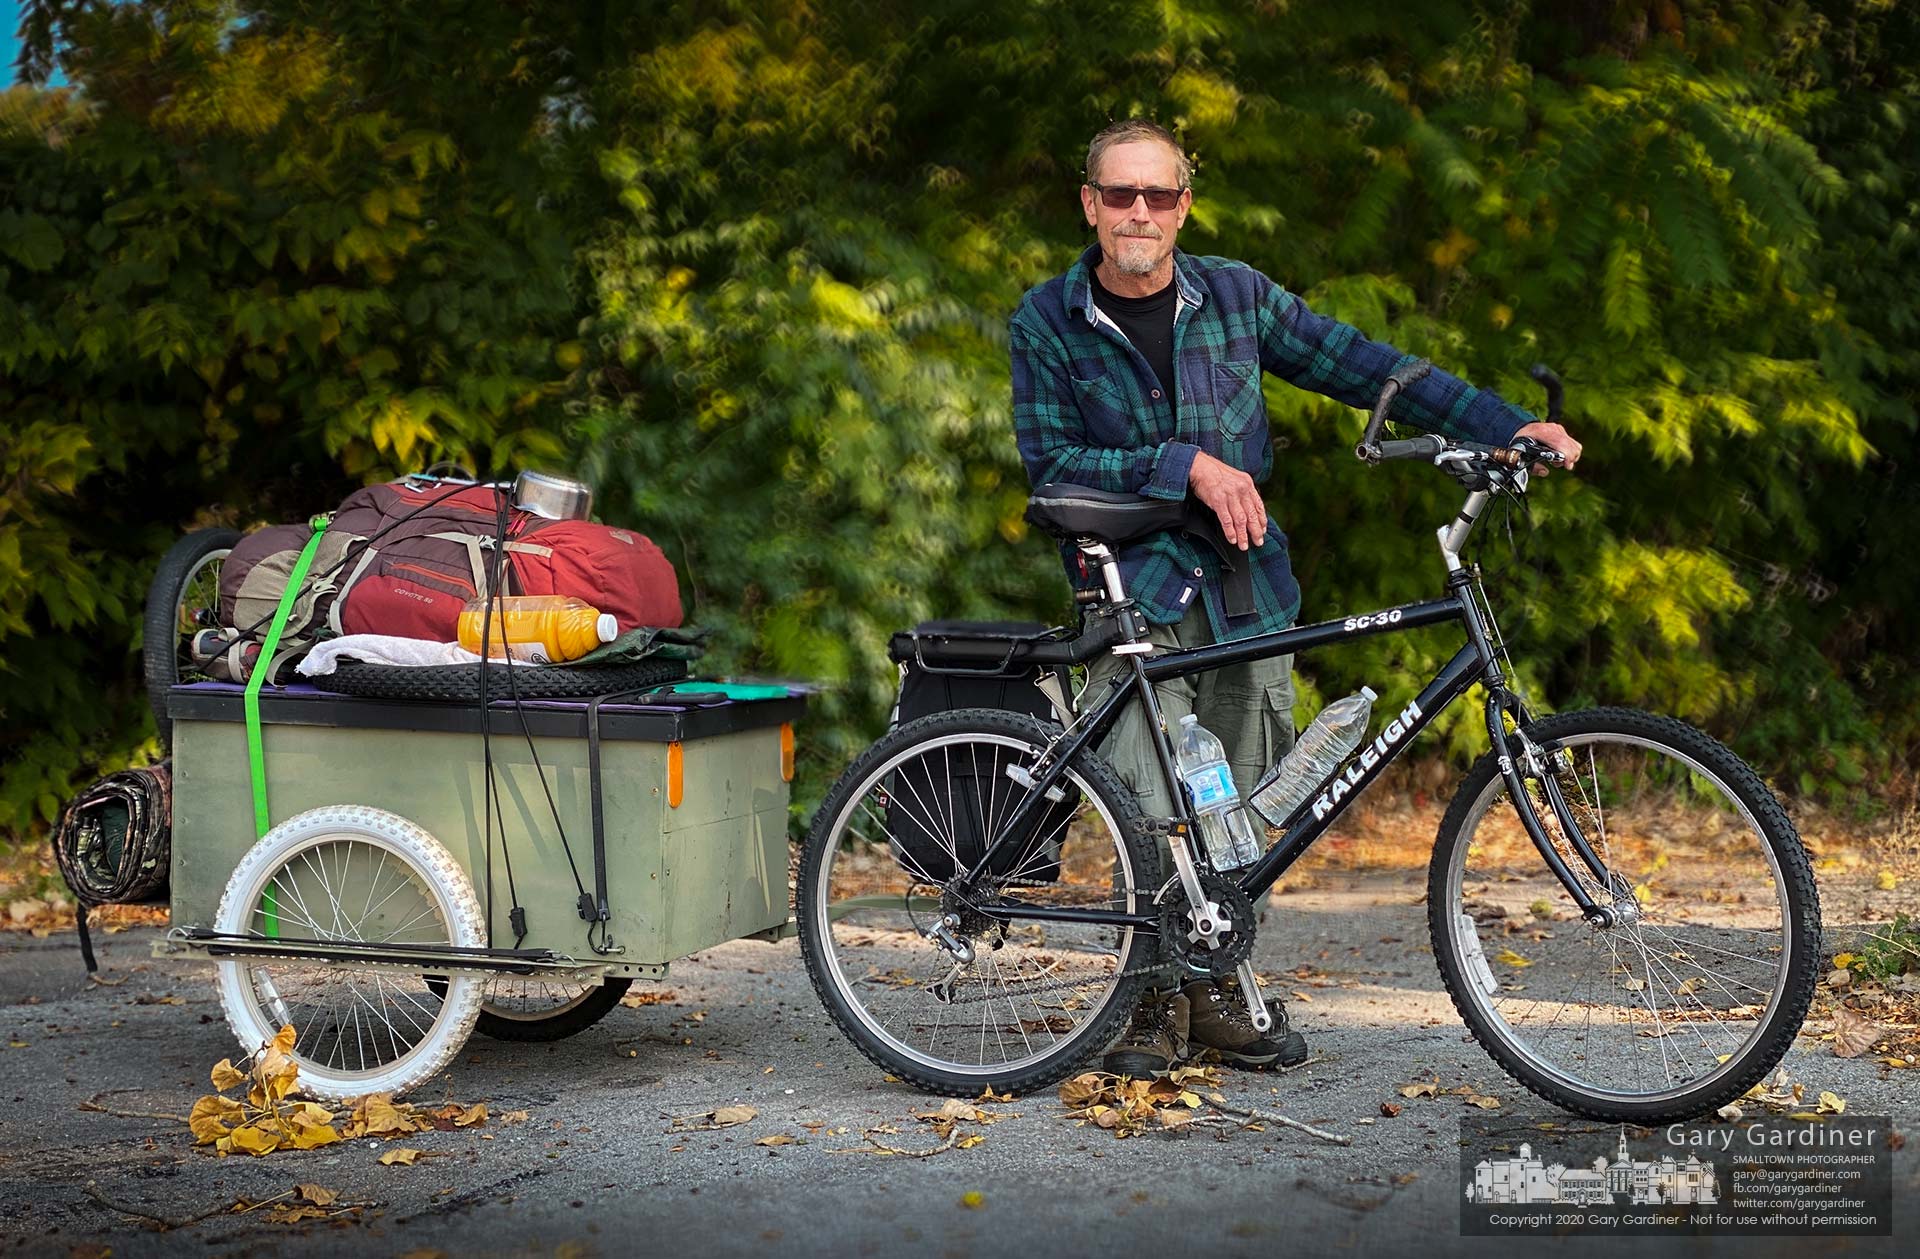 Traveling bicyclist Gregor poses for a photo before resuming his trip home in northeast Ohio after another trip on the Ohio-Erie Trail. My Final Photo for Oct. 6, 2020.